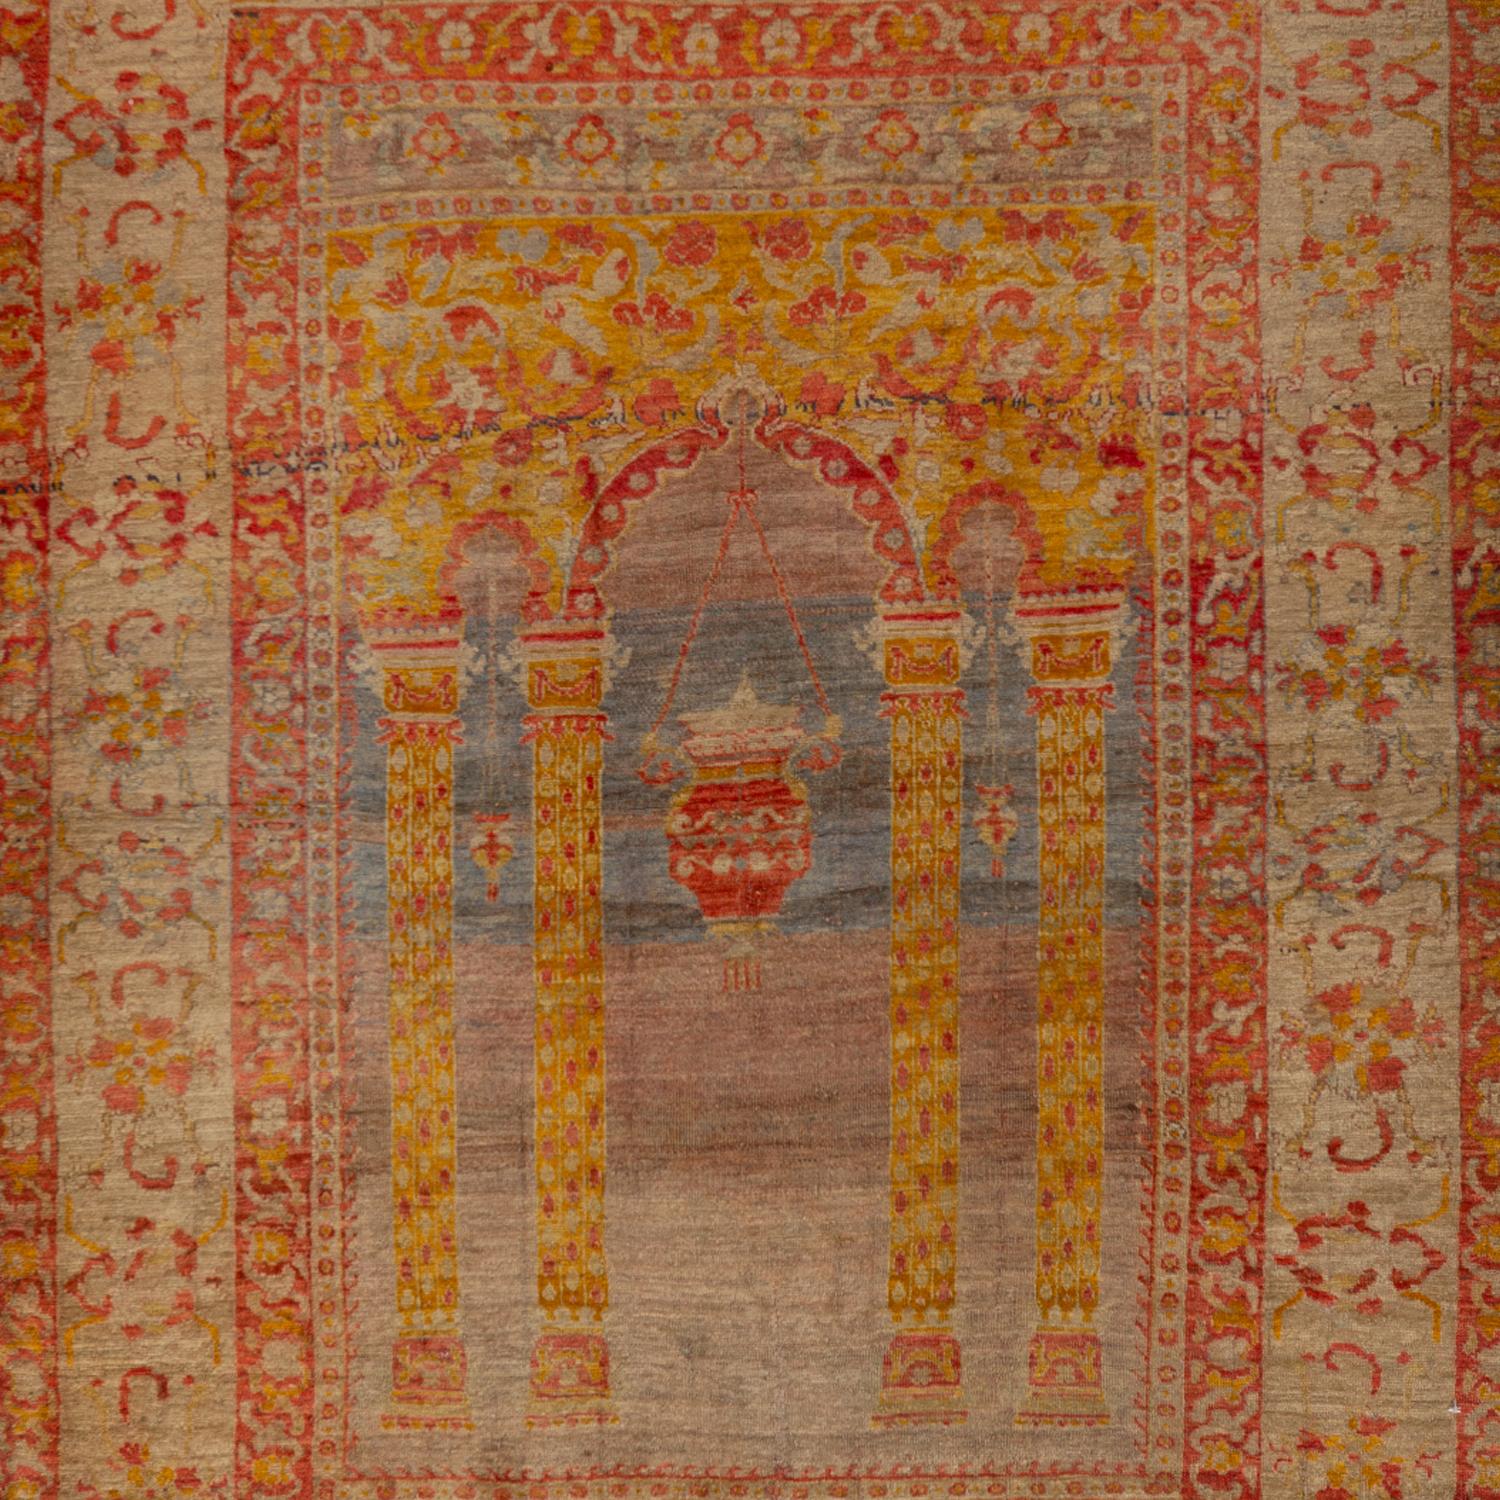 Featuring a timeless prayer rug design, this Vintage Traditional Anatolian Wool Rug - 4'5